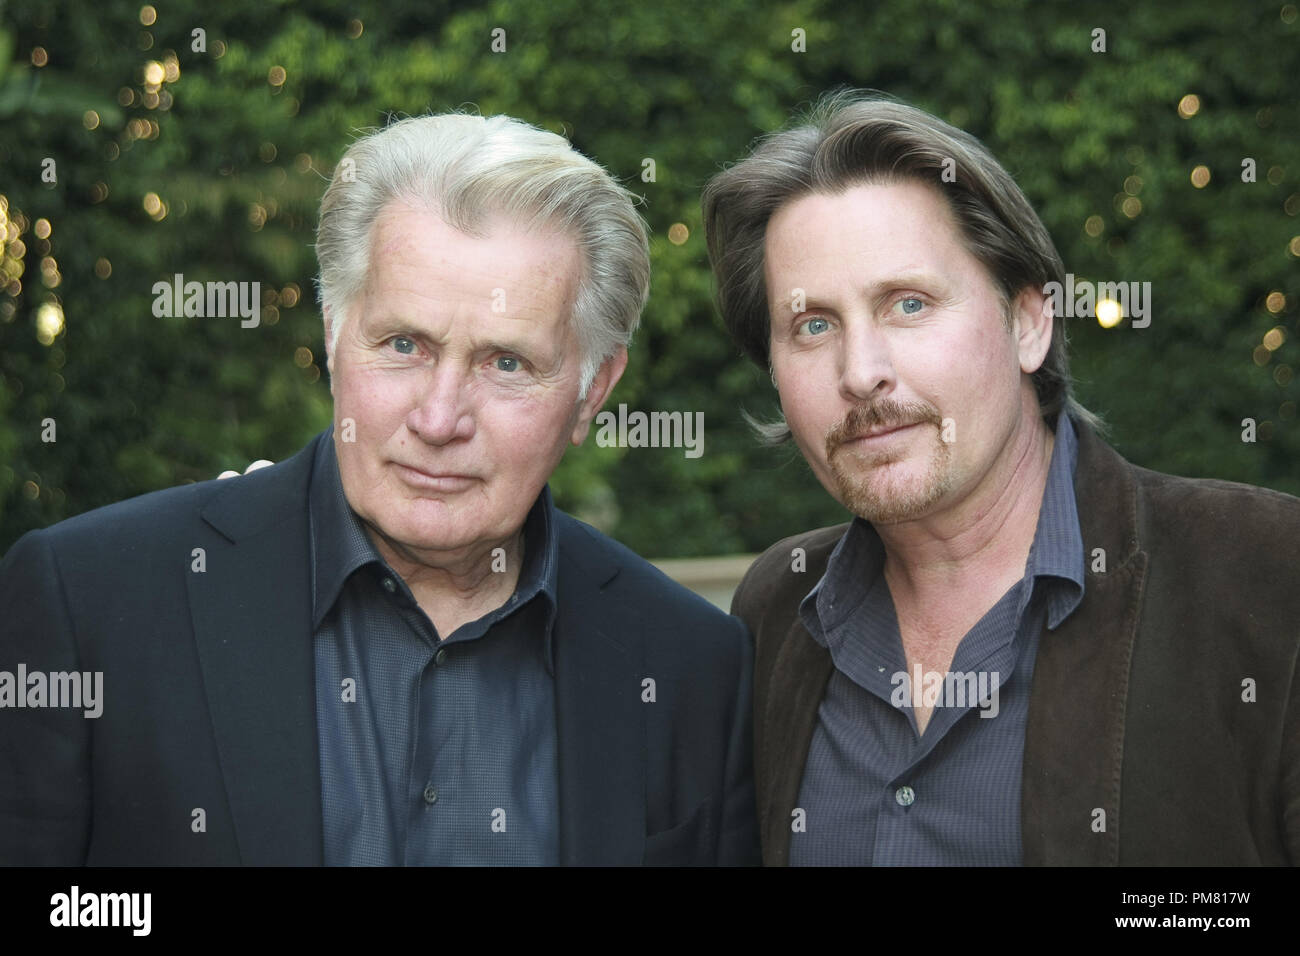 Martin Sheen and Emilio Estevez 'The Way' Portrait Session, November 8, 2011.  Reproduction by American tabloids is absolutely forbidden. File Reference # 31273 013JRC  For Editorial Use Only -  All Rights Reserved Stock Photo